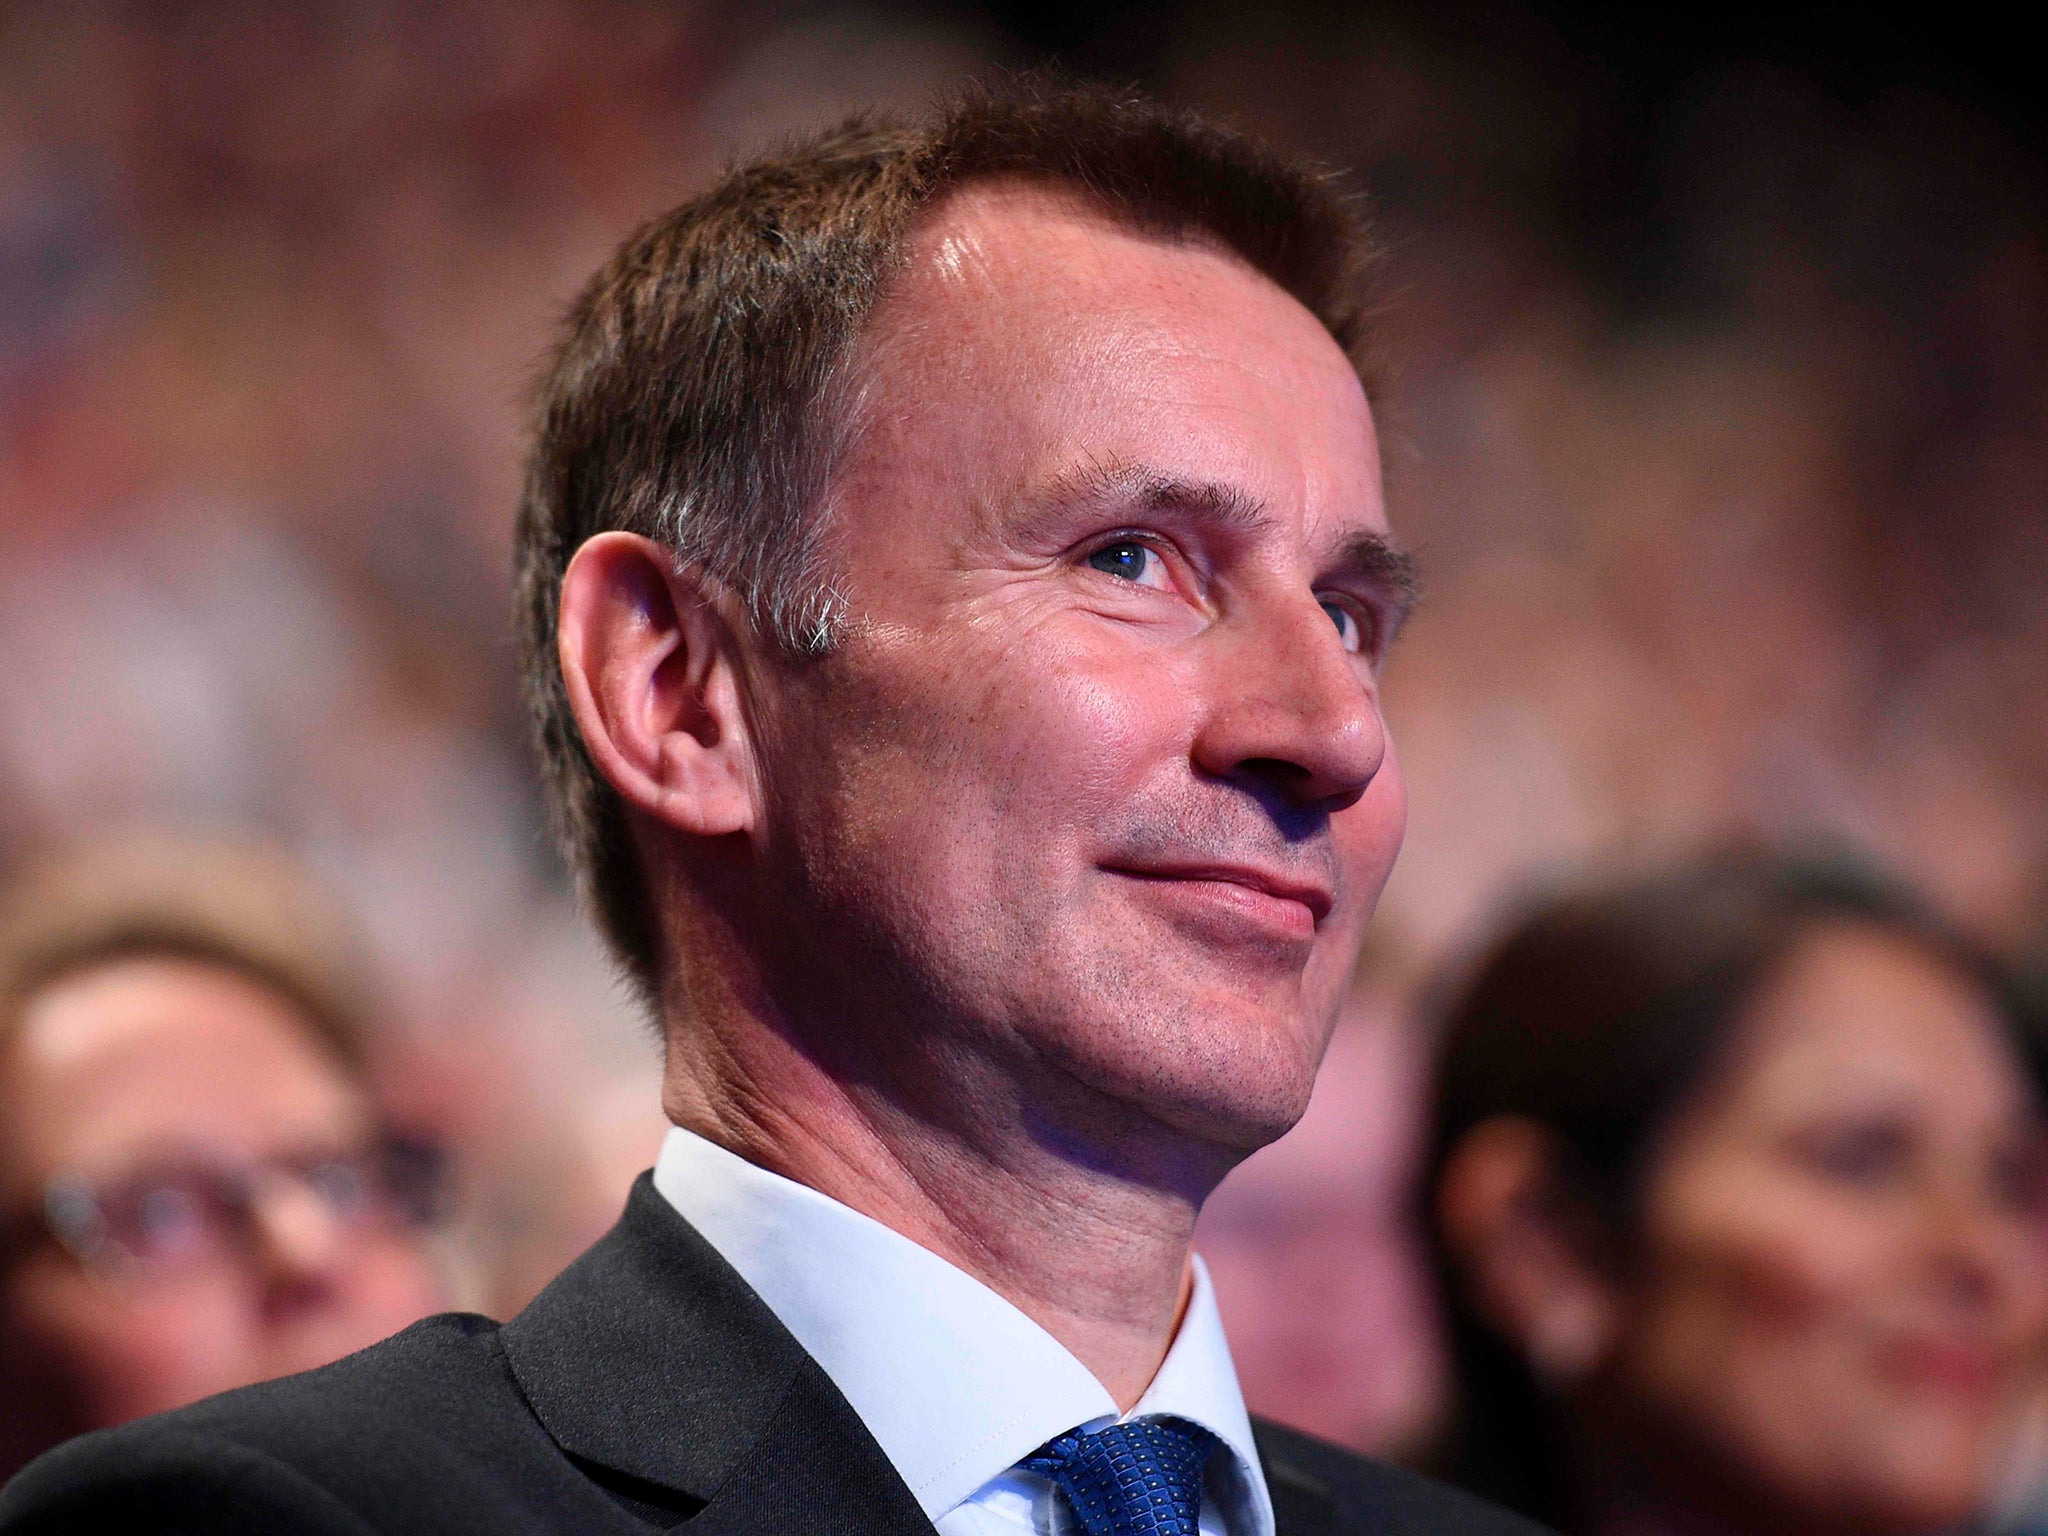 Jeremy Hunt gave a speech at the Tory Party conference which raised a few eyebrows